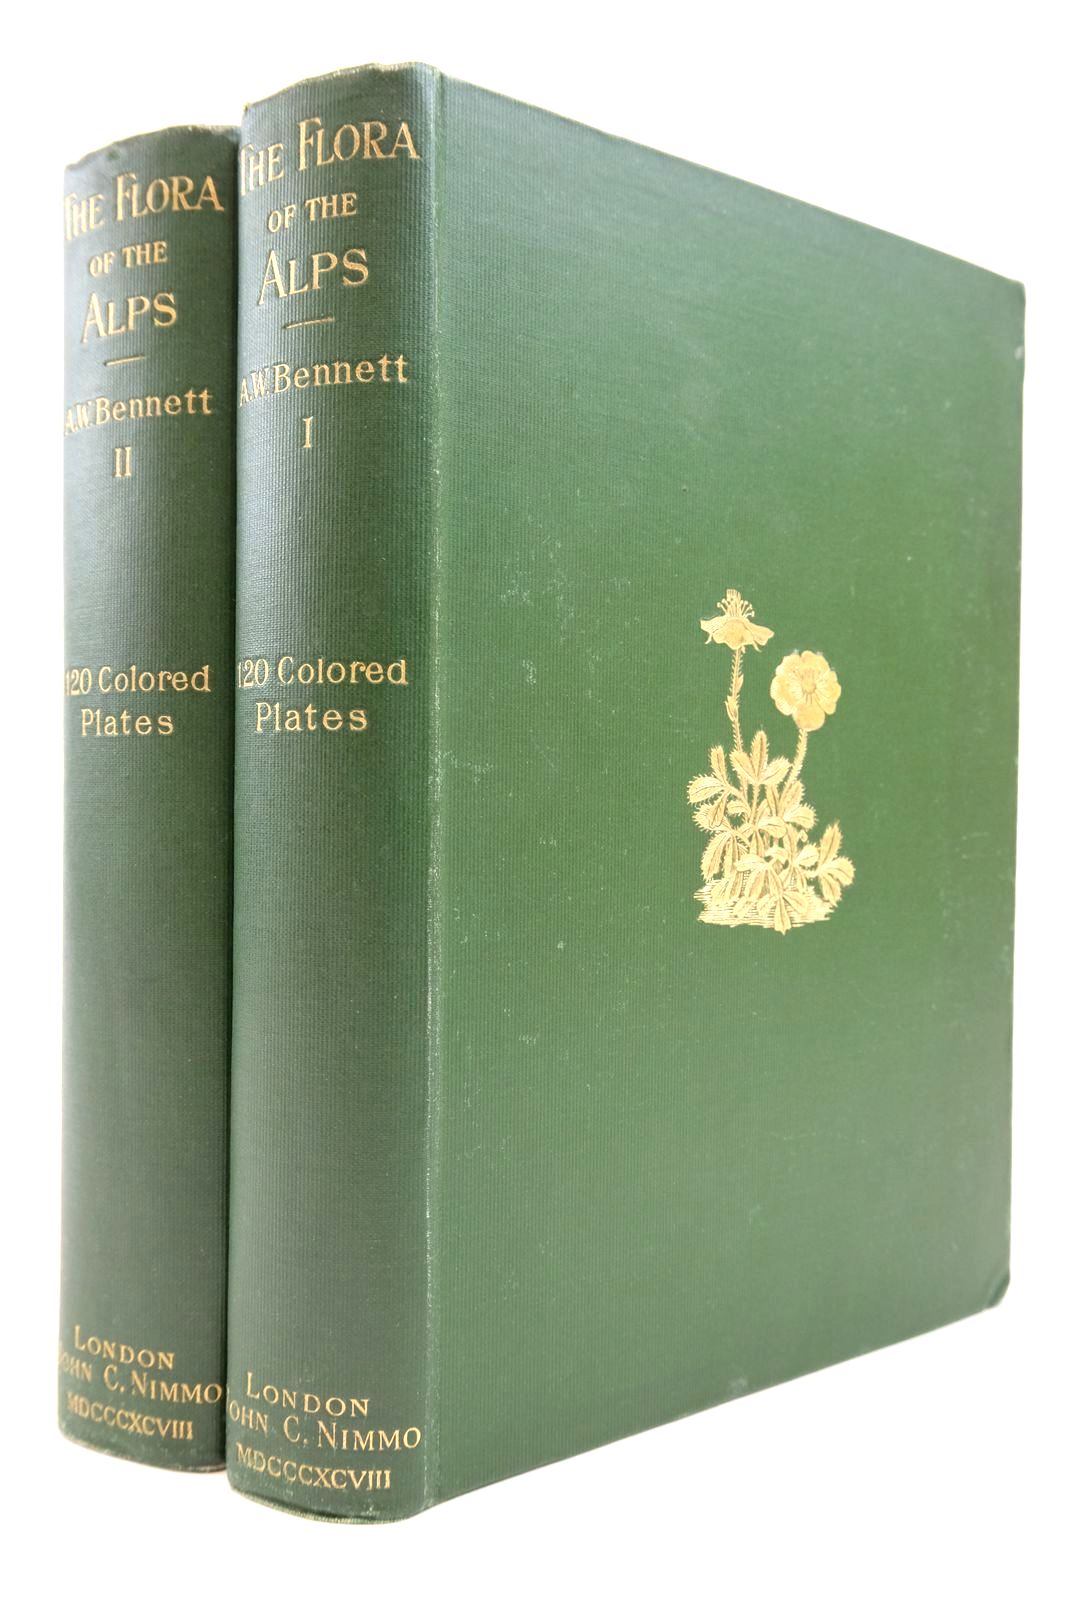 Photo of THE FLORA OF THE ALPS (2 VOLUMES) written by Bennett, Alfred W. published by John C. Nimmo (STOCK CODE: 2140379)  for sale by Stella & Rose's Books